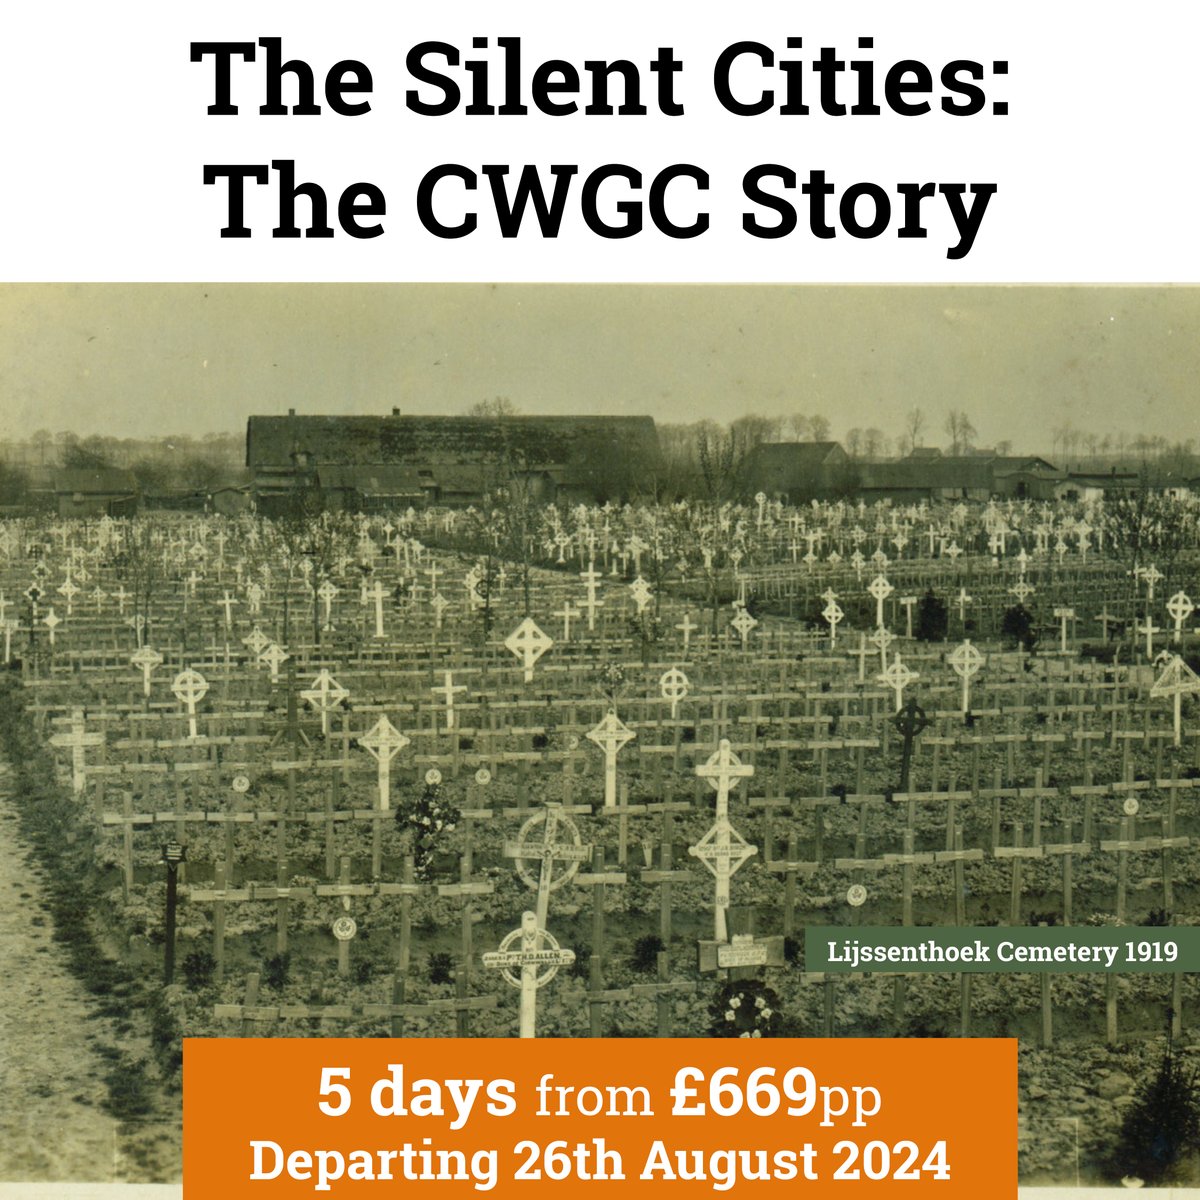 If you’re searching for a unique battlefield experience, we still have places available on this fascinating tour for August. Developed in association with the @CWGC, discover more about their remarkable work with specially curated workshops >> ow.ly/aubt50QZzAb